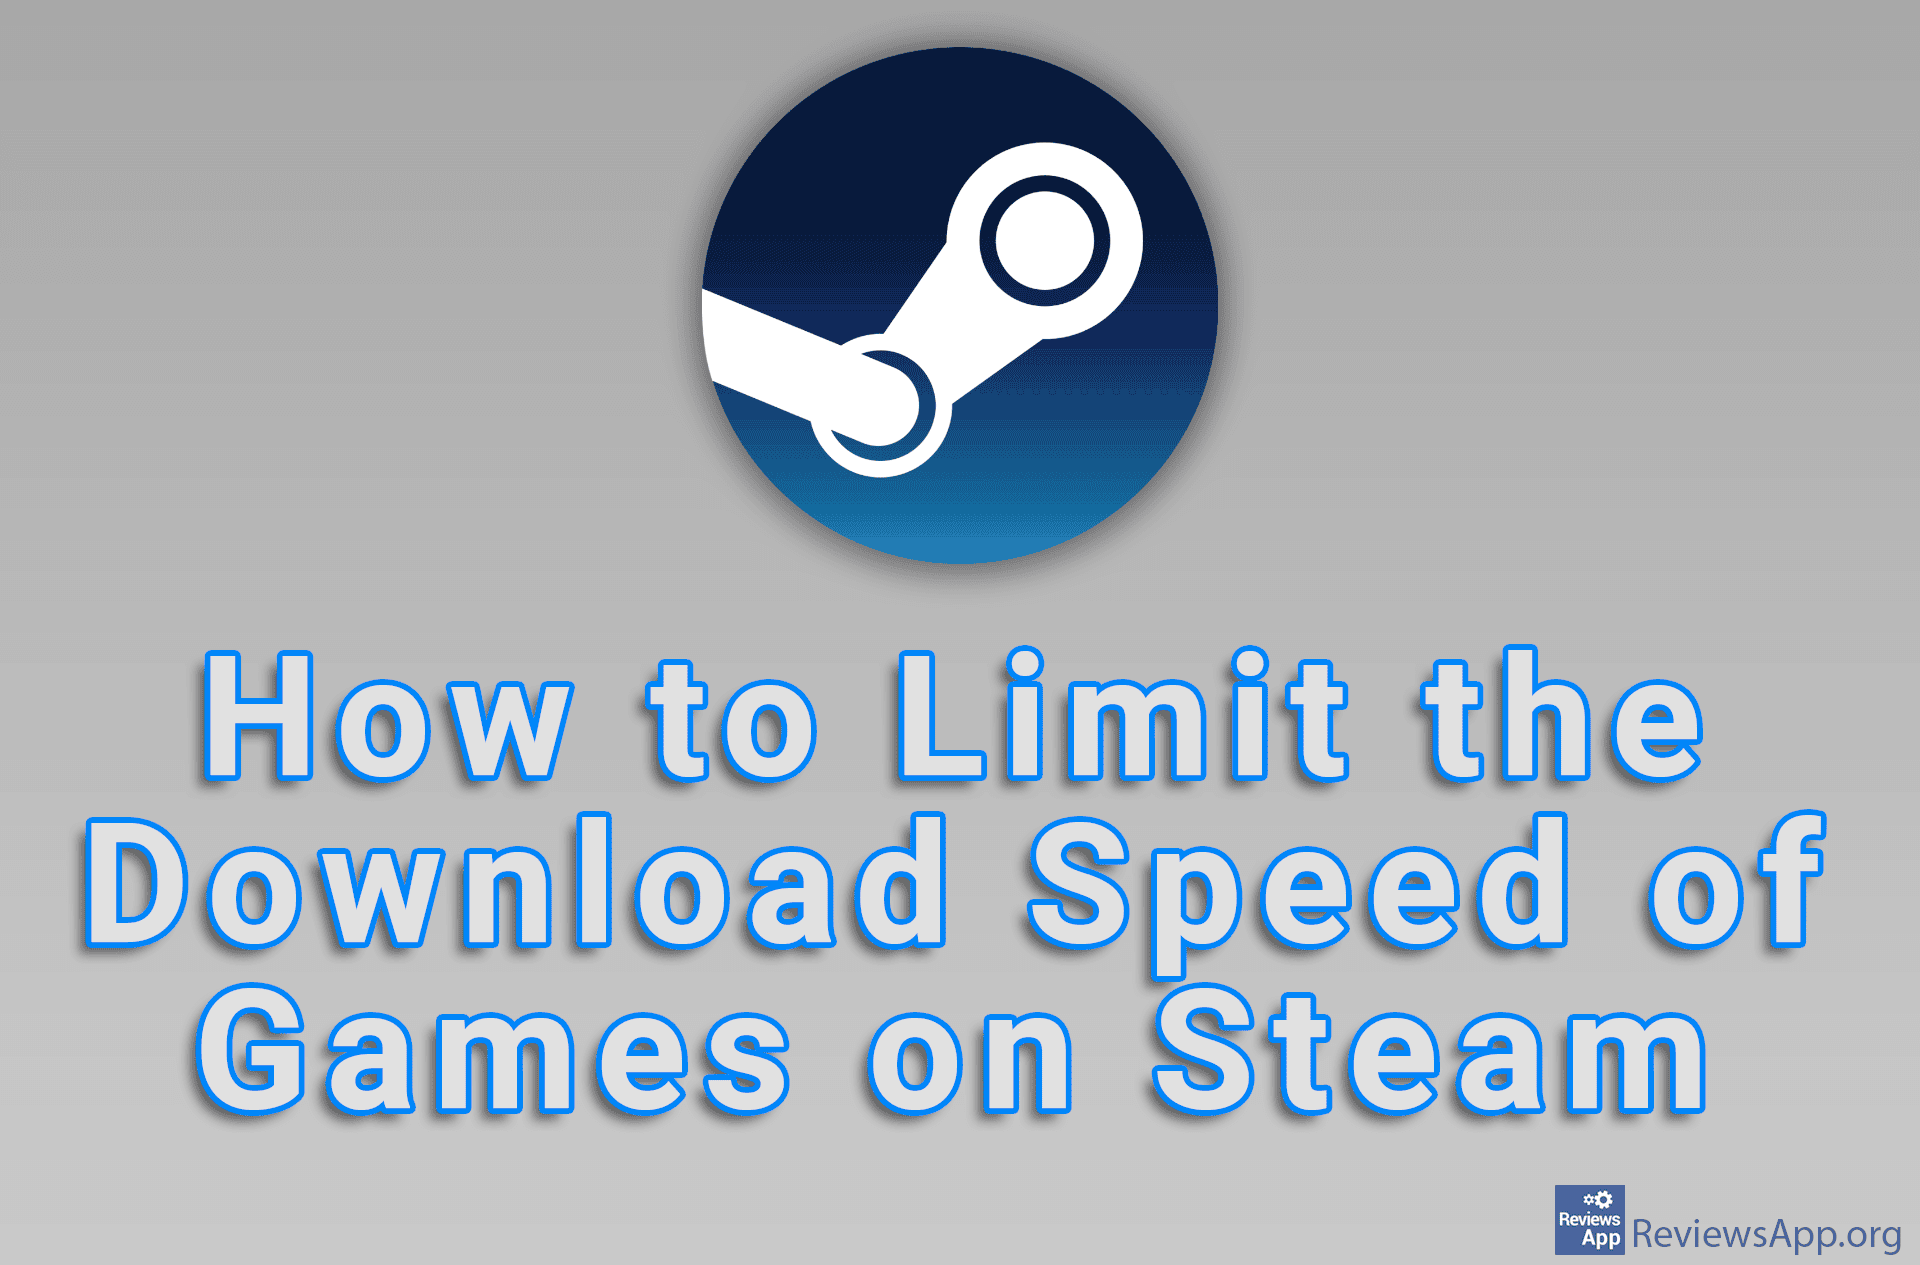 How to Limit the Download Speed of Games on Steam